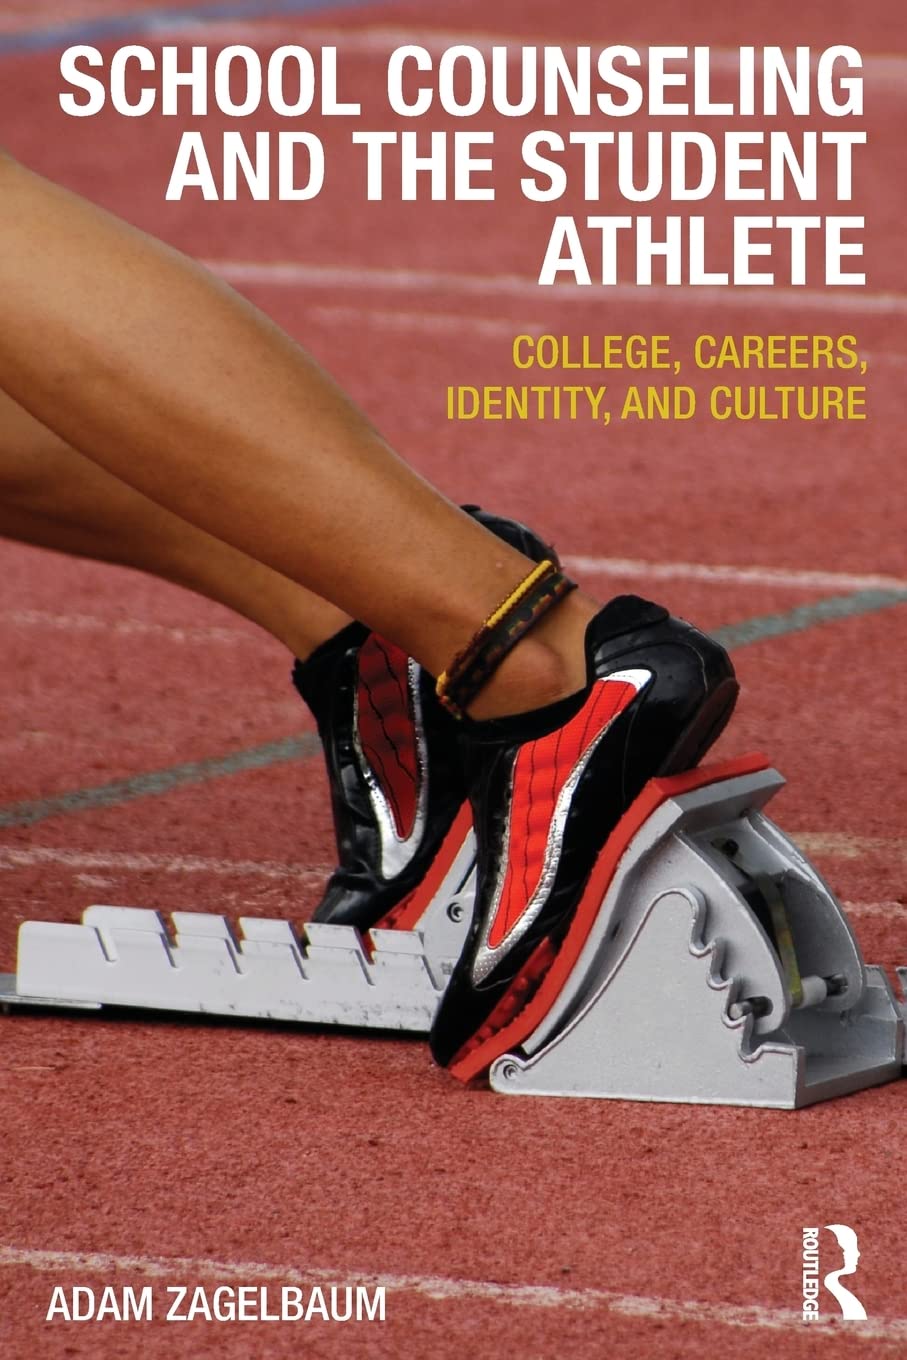 School Counseling and the Student Athlete: College, Careers, Identity, and Culture